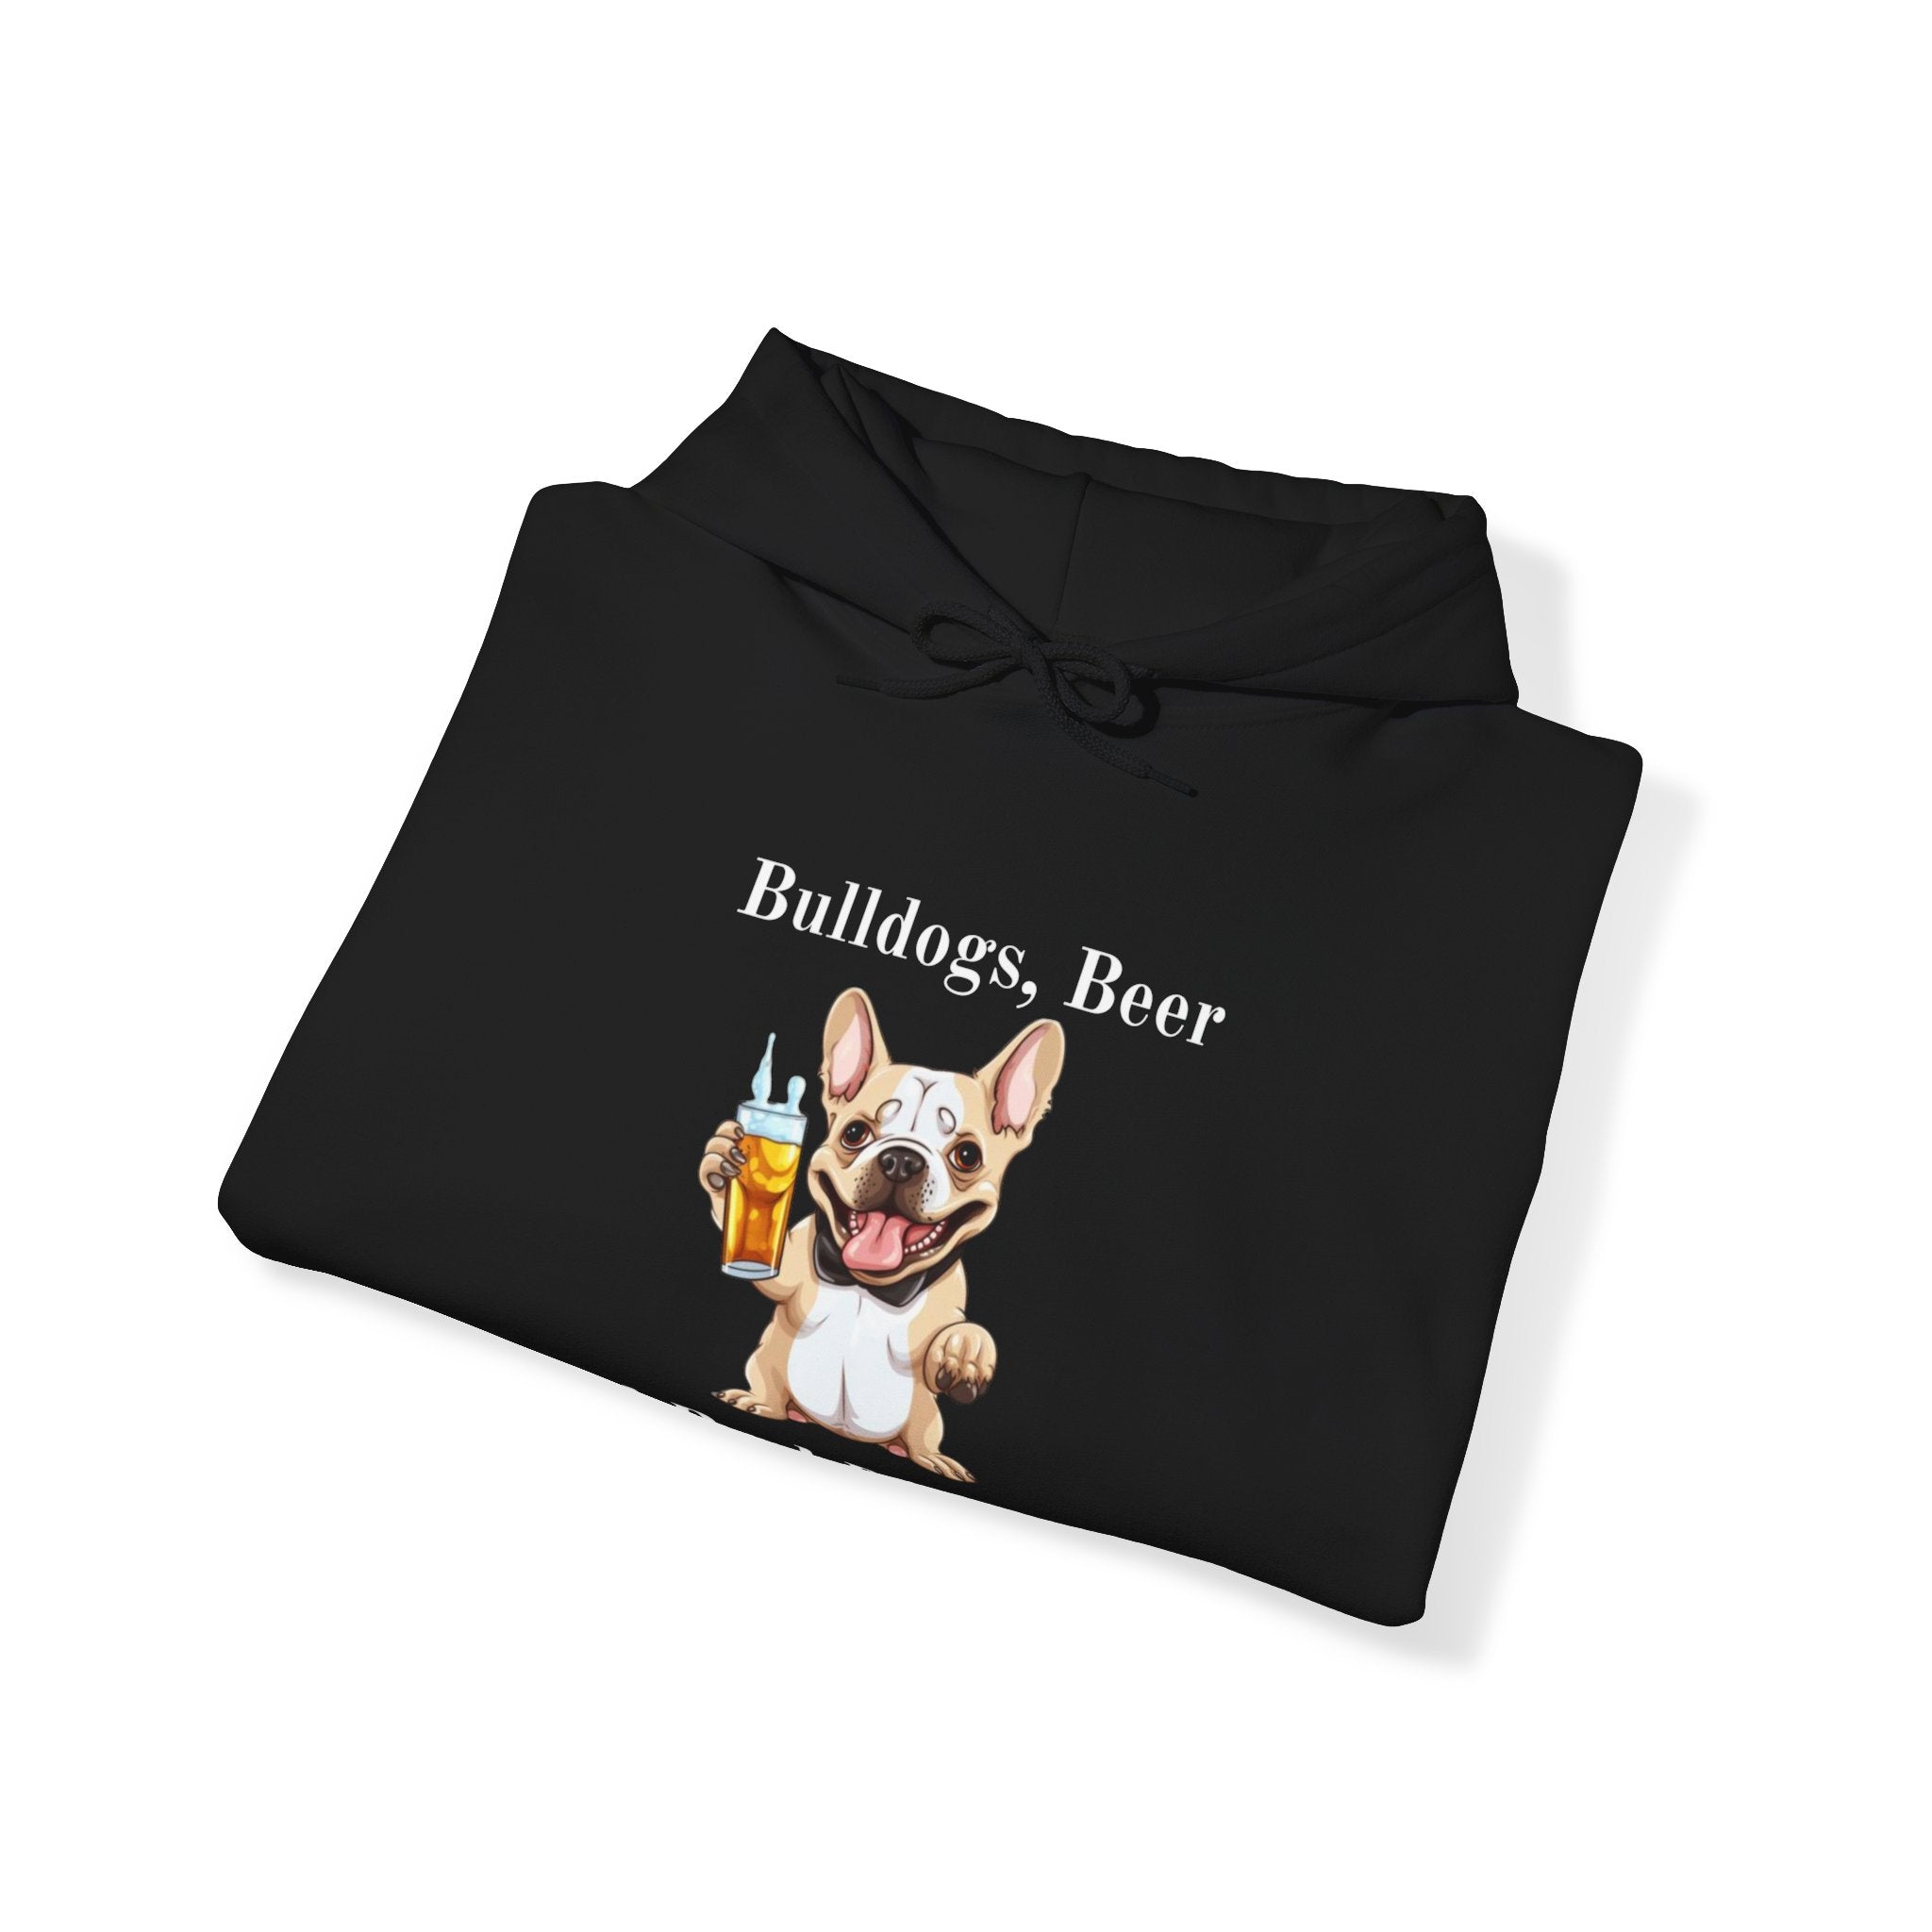 Bulldogs, Beer, and Bad Decisions" Hoodie - Your Go-To Gear for Mischievous Times! (French/Brown)